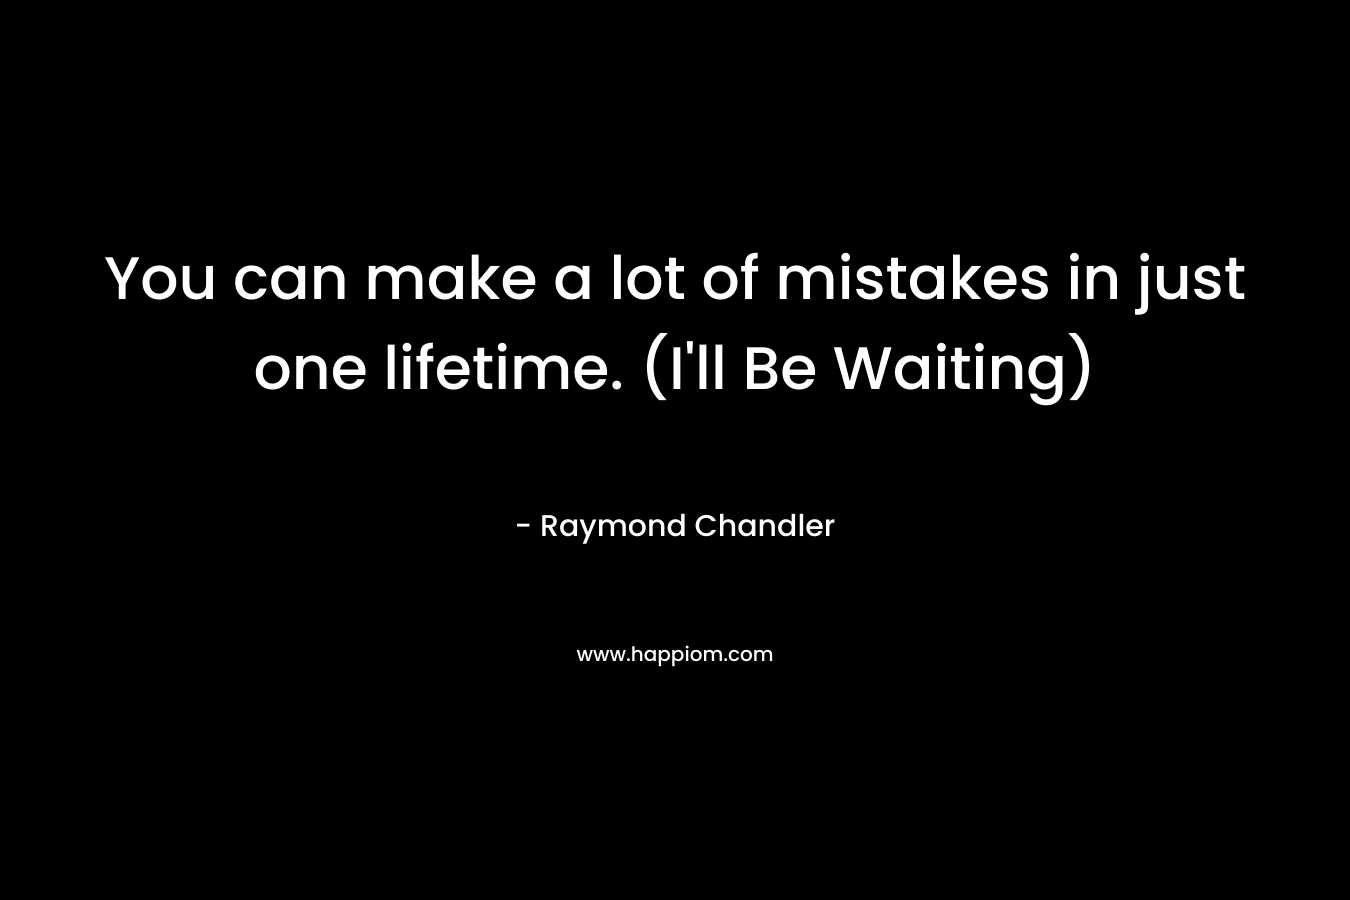 You can make a lot of mistakes in just one lifetime. (I'll Be Waiting)